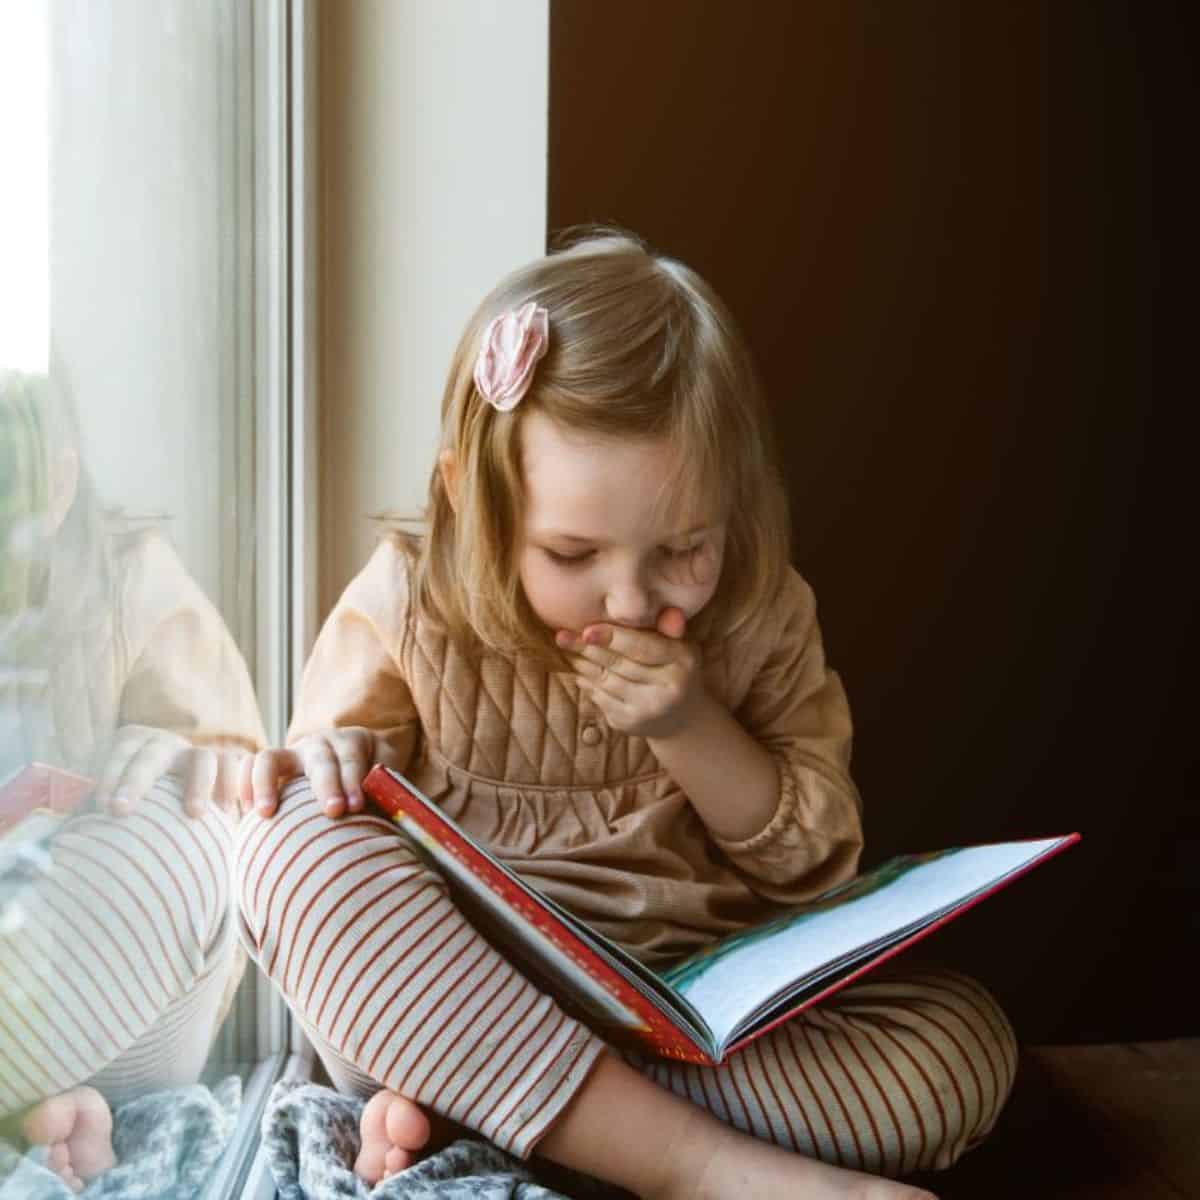 Young little girl sitting near a window and reading a book.